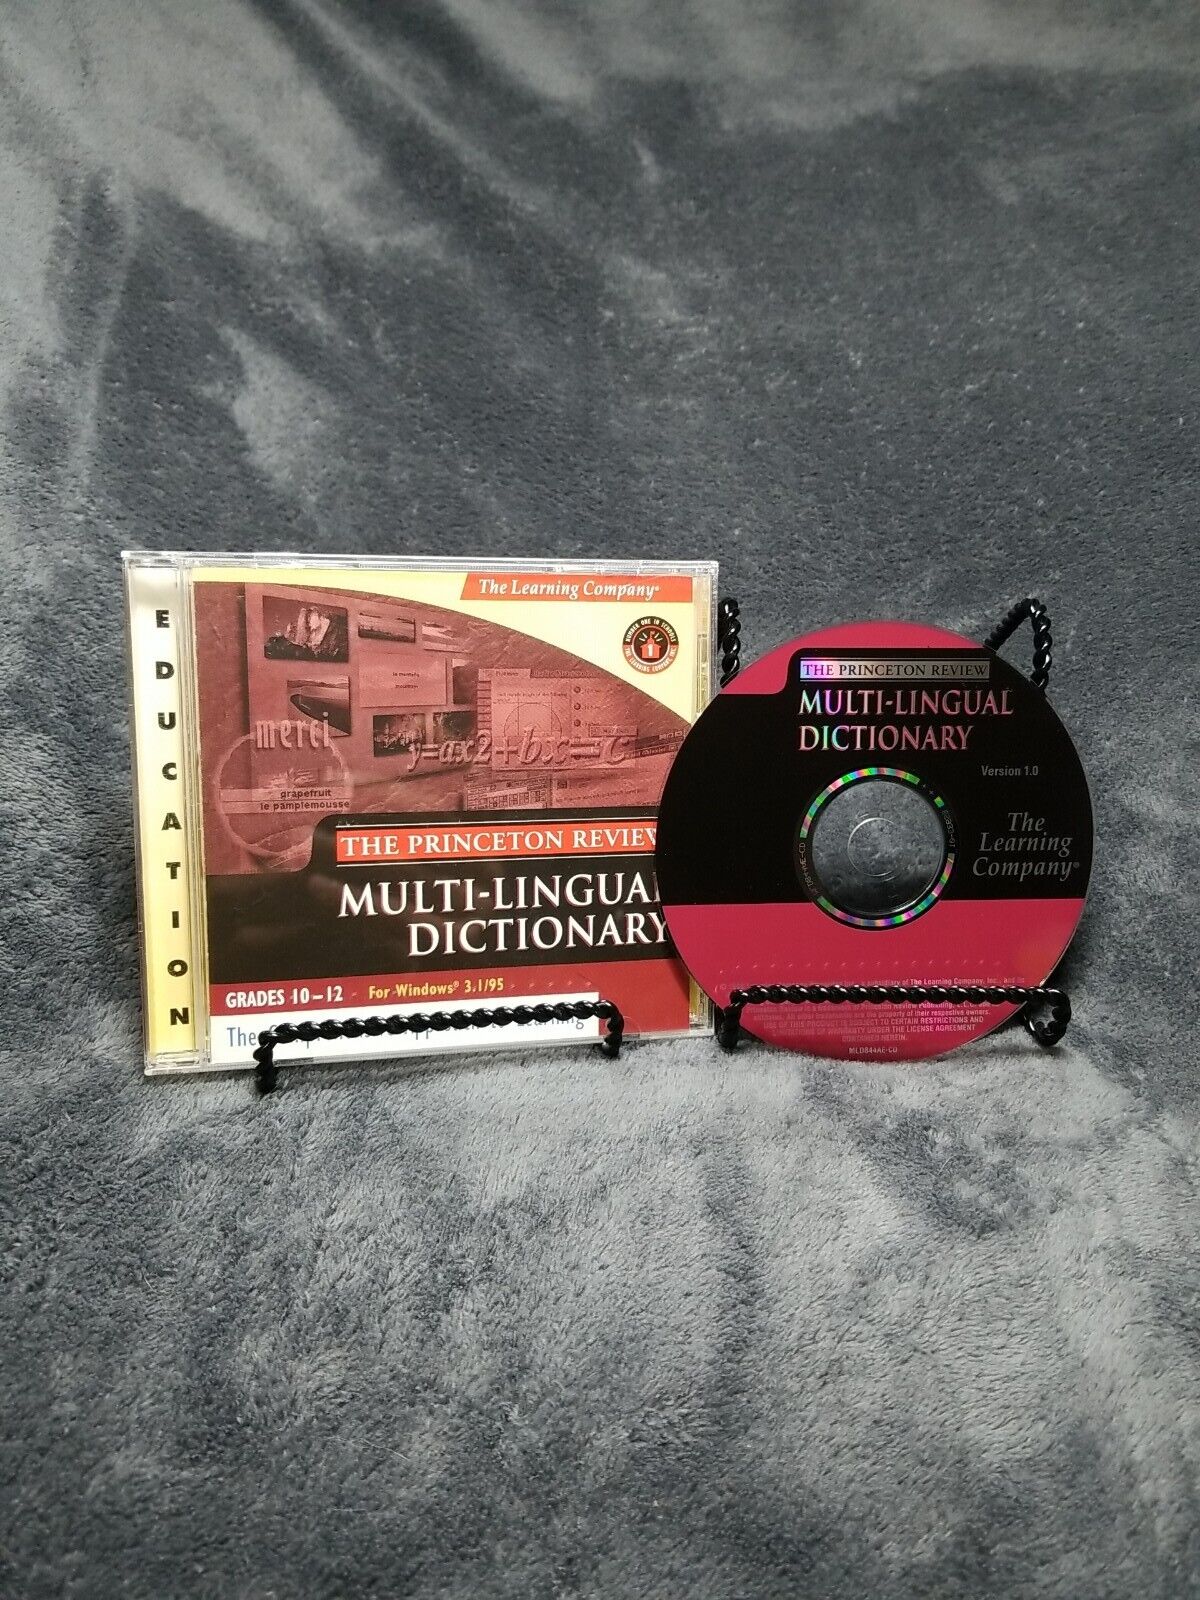 The Princeton Review Multi-Lingual Dictionary (PC/Mac) The Learning Company